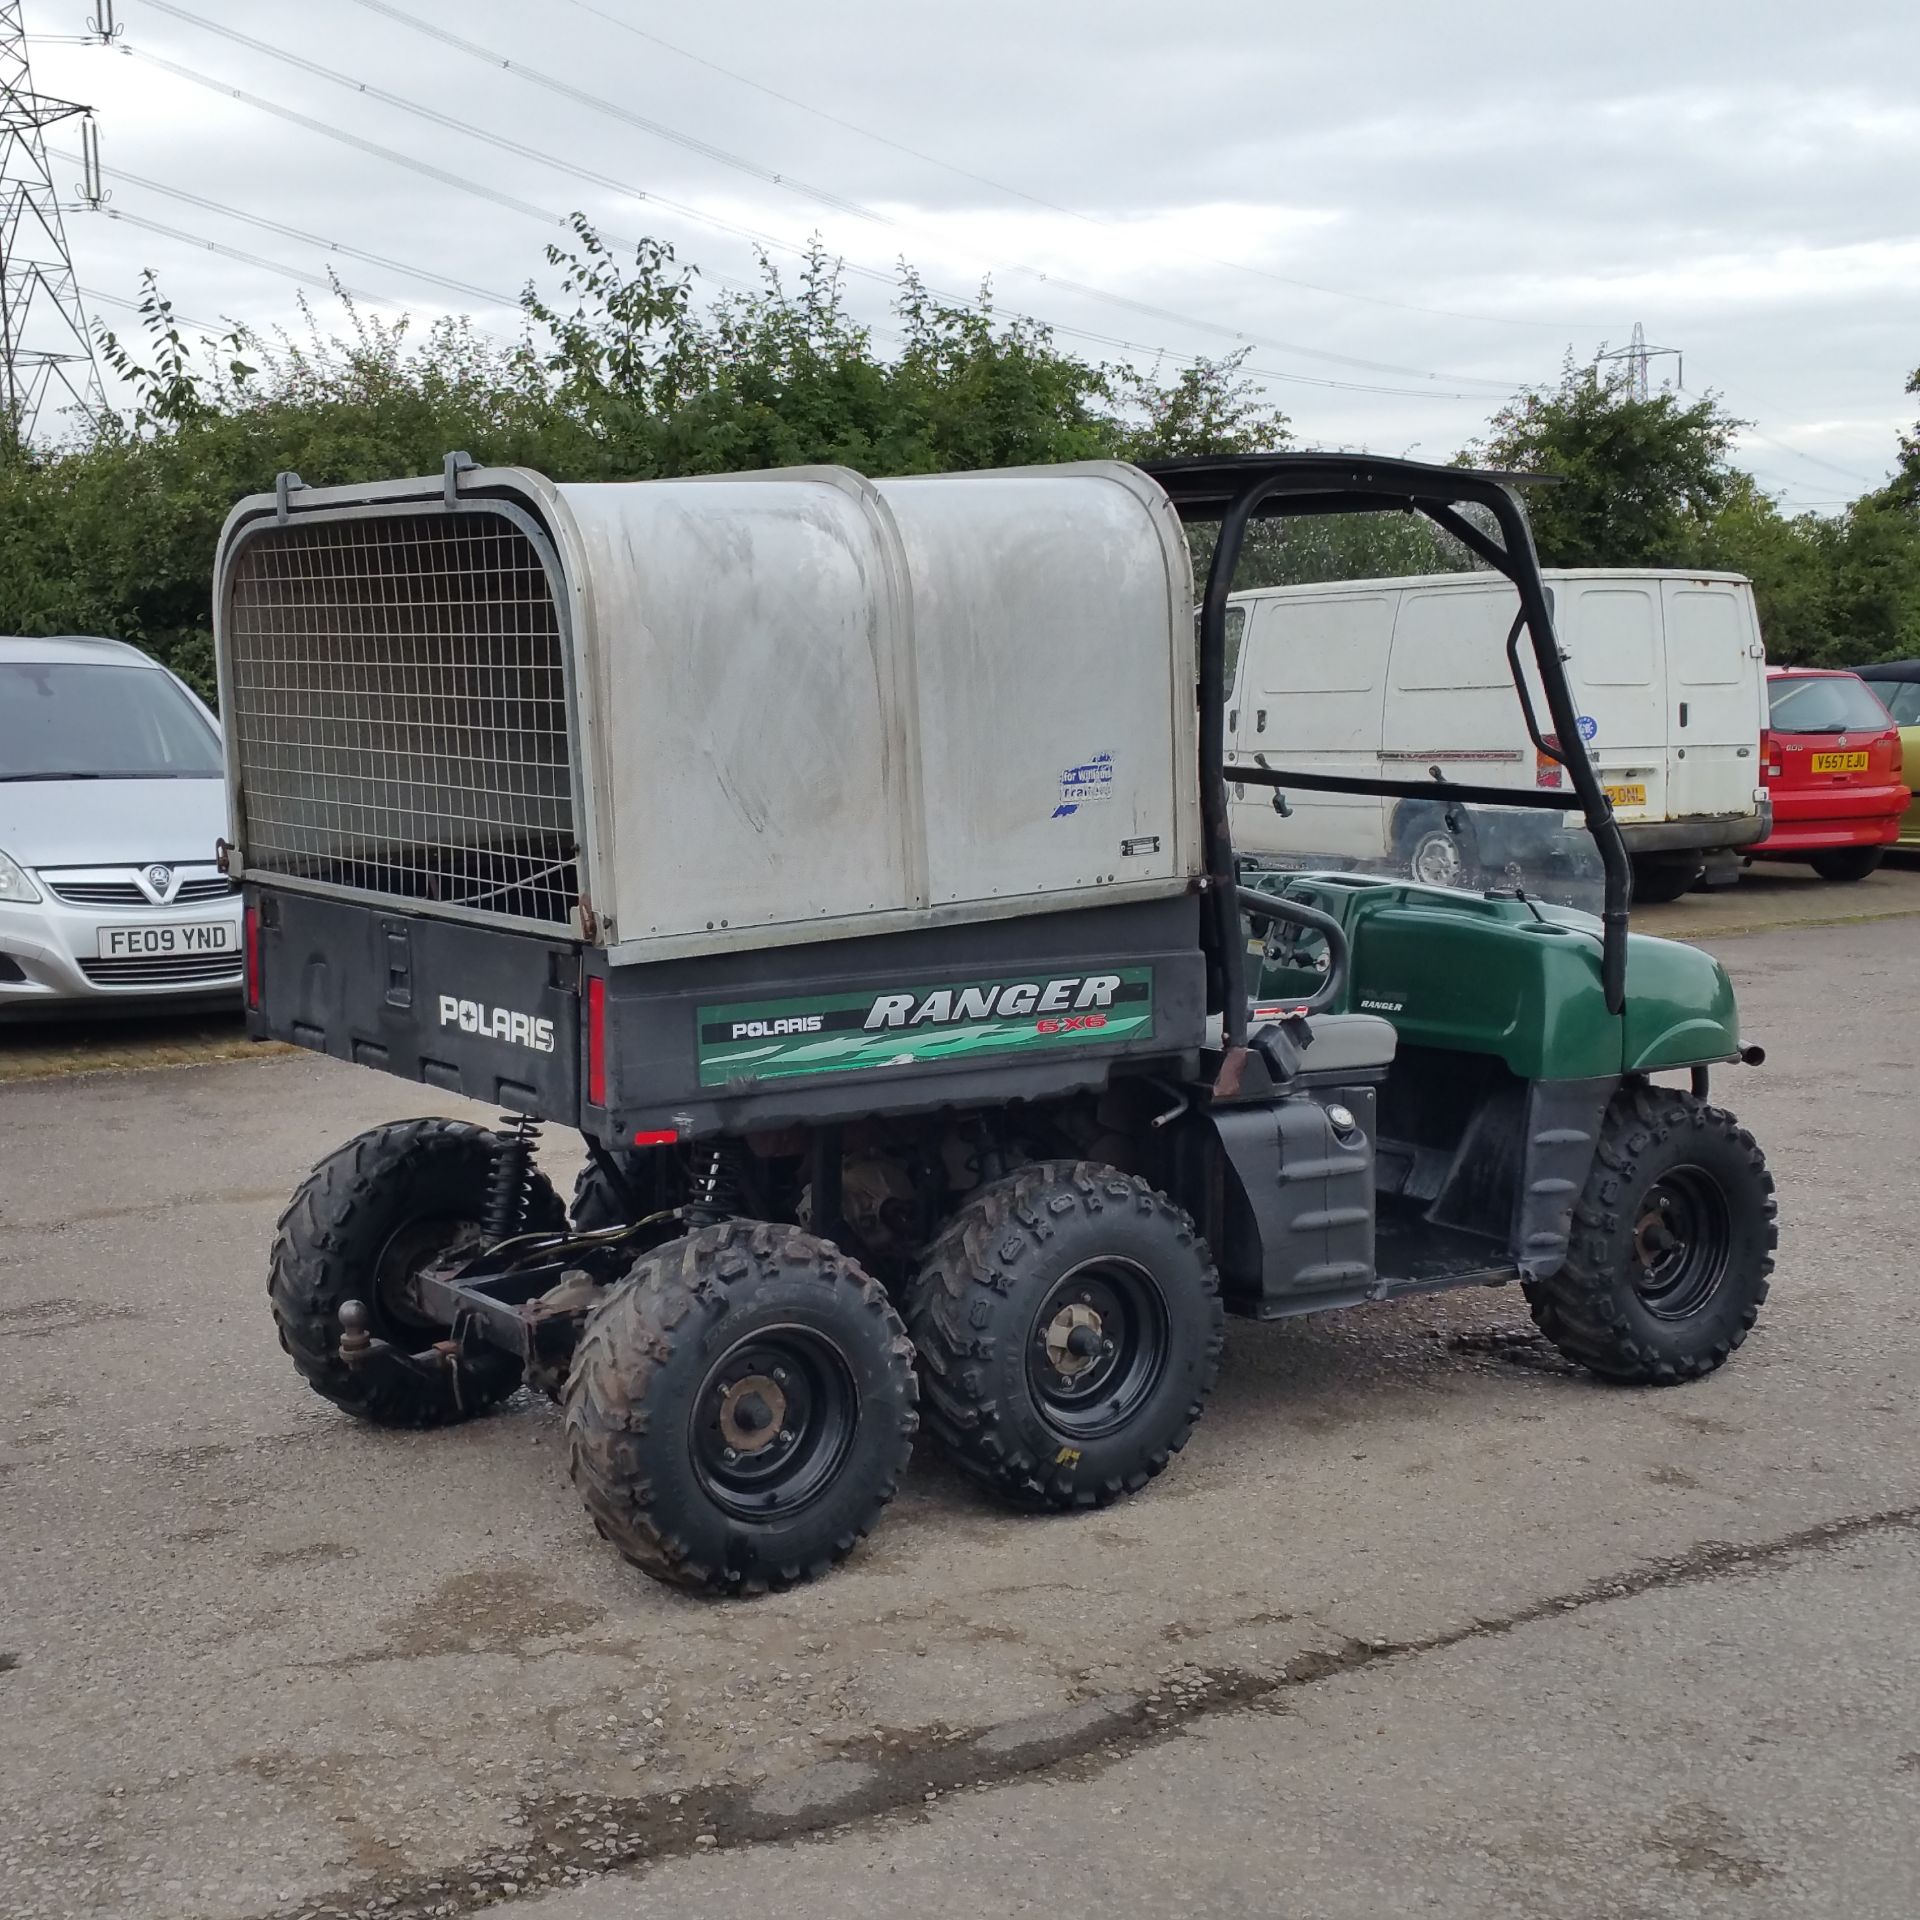 Polaris Ranger 6x6 500cc single cylinder petrol Hours 932 Year of manufacture 2004 4 or 6 wheel - Image 4 of 7